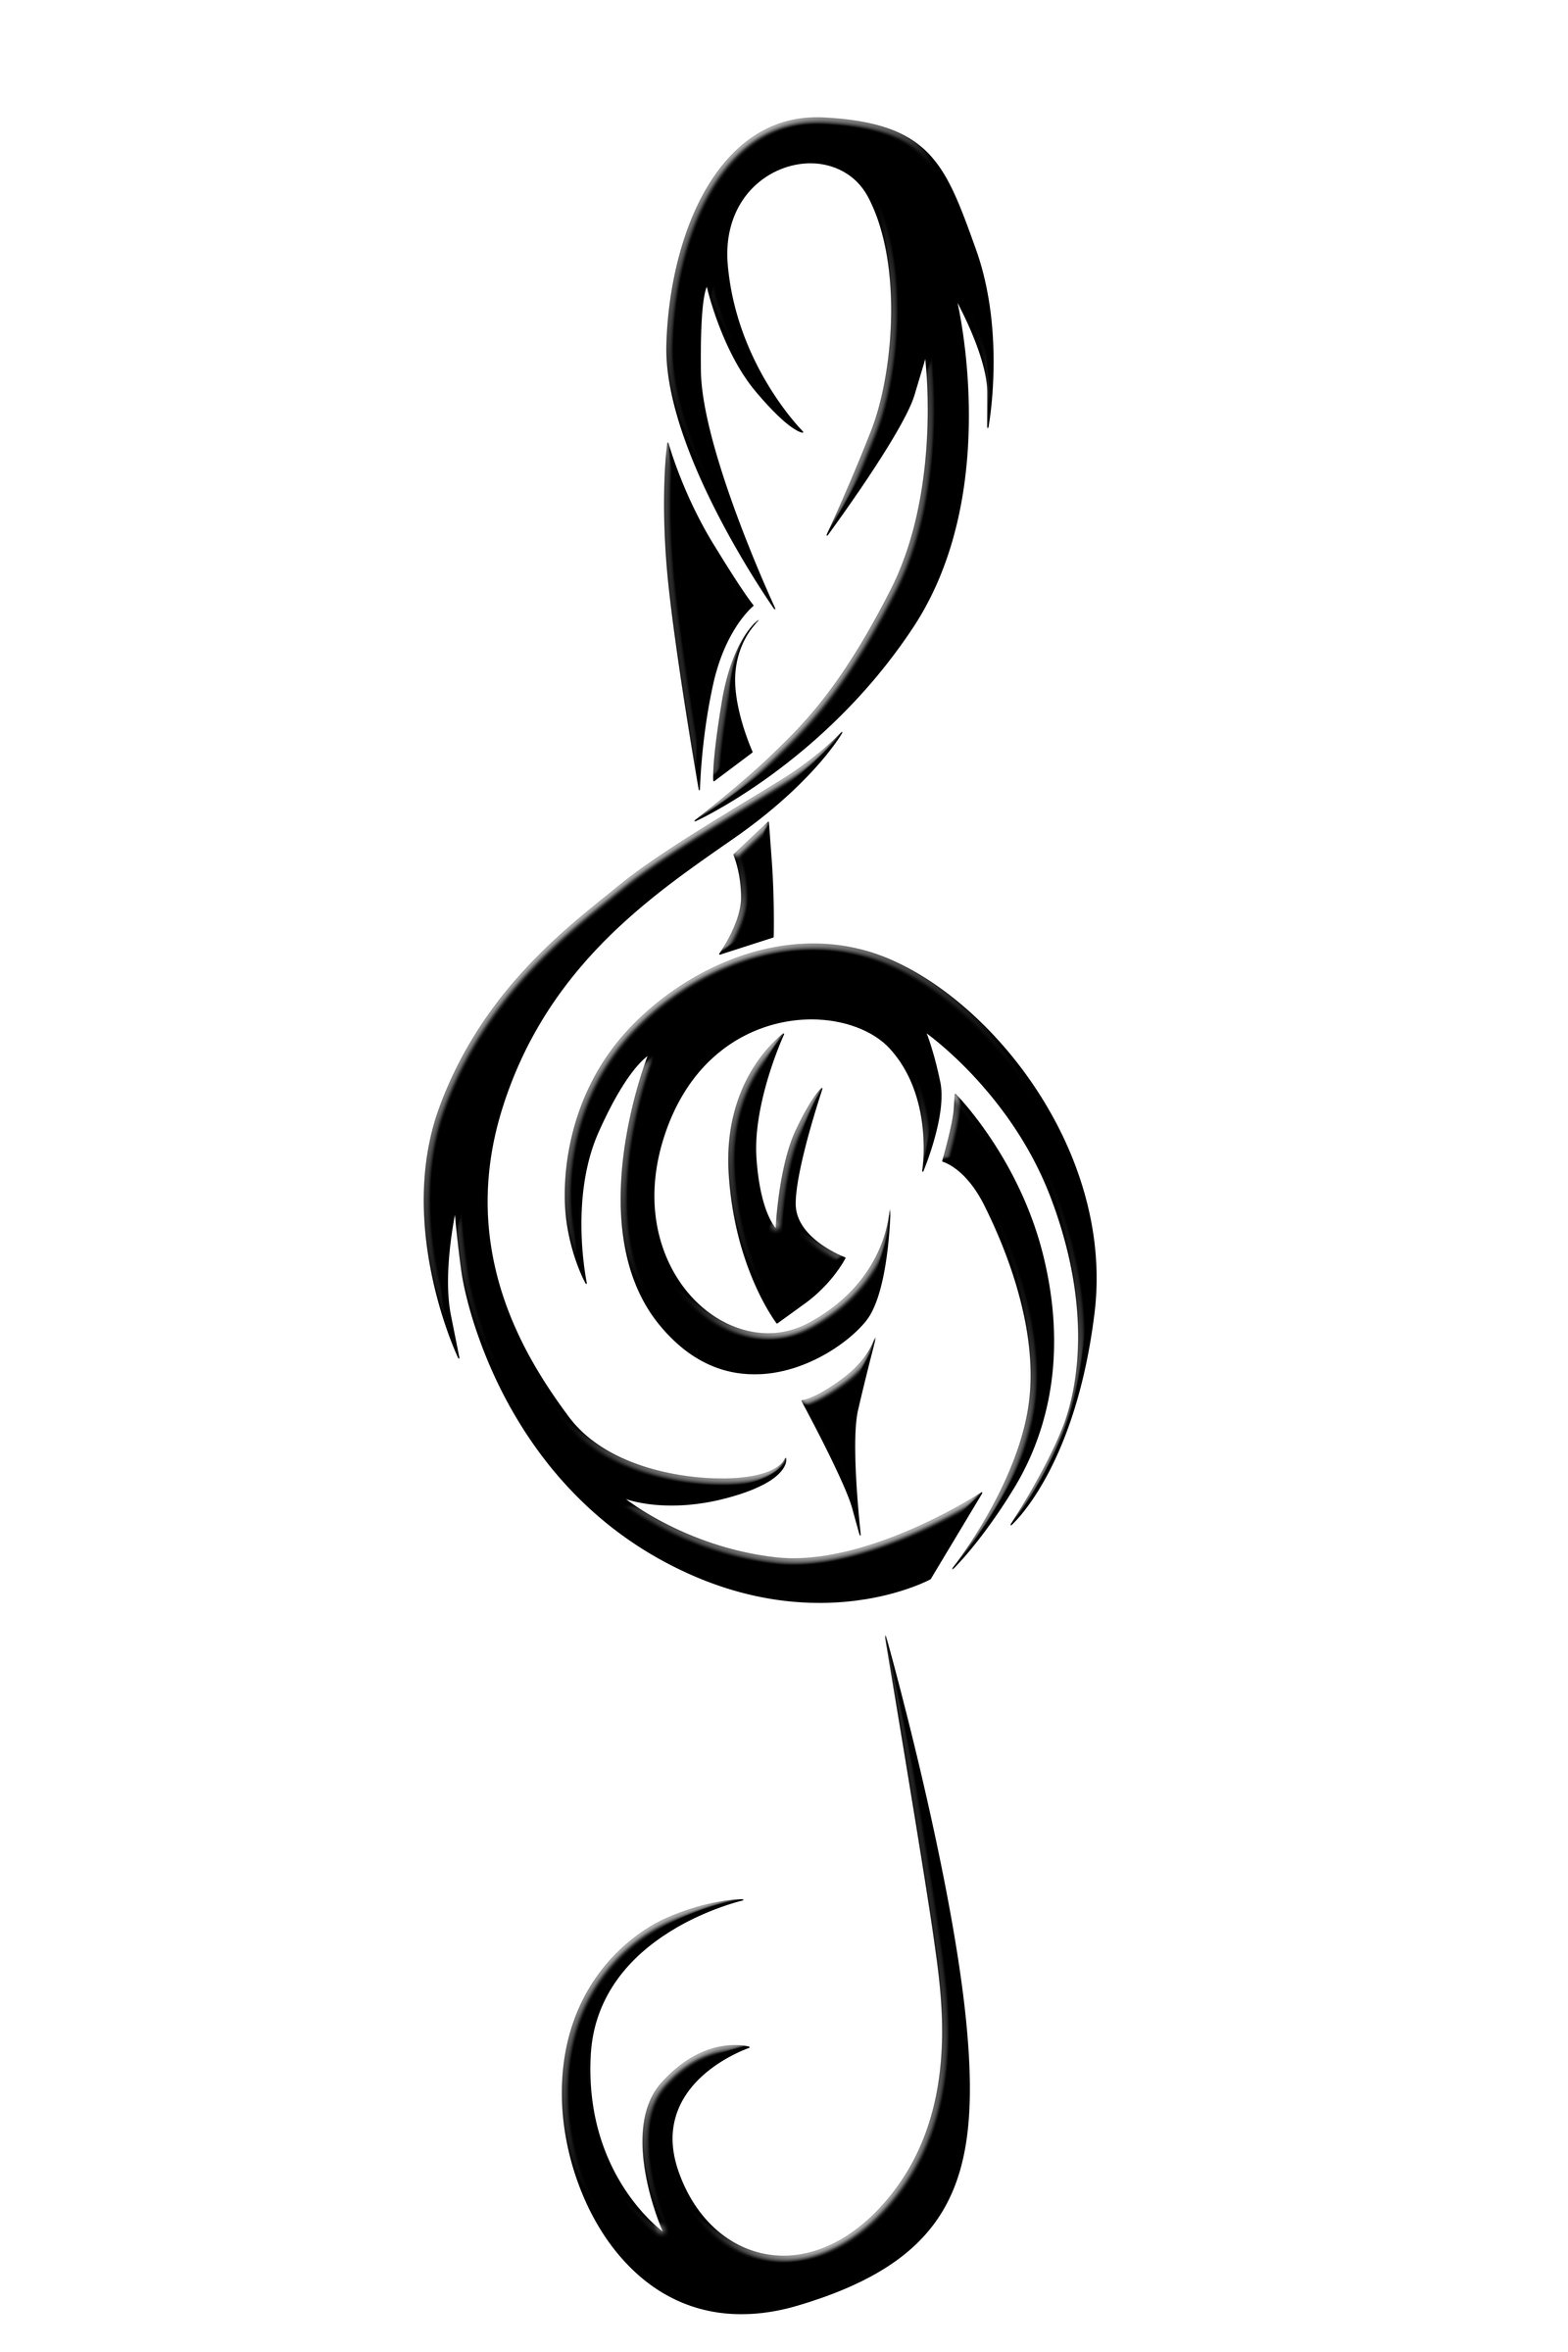 deviantART: More Like bass clef by - ClipArt Best - ClipArt Best